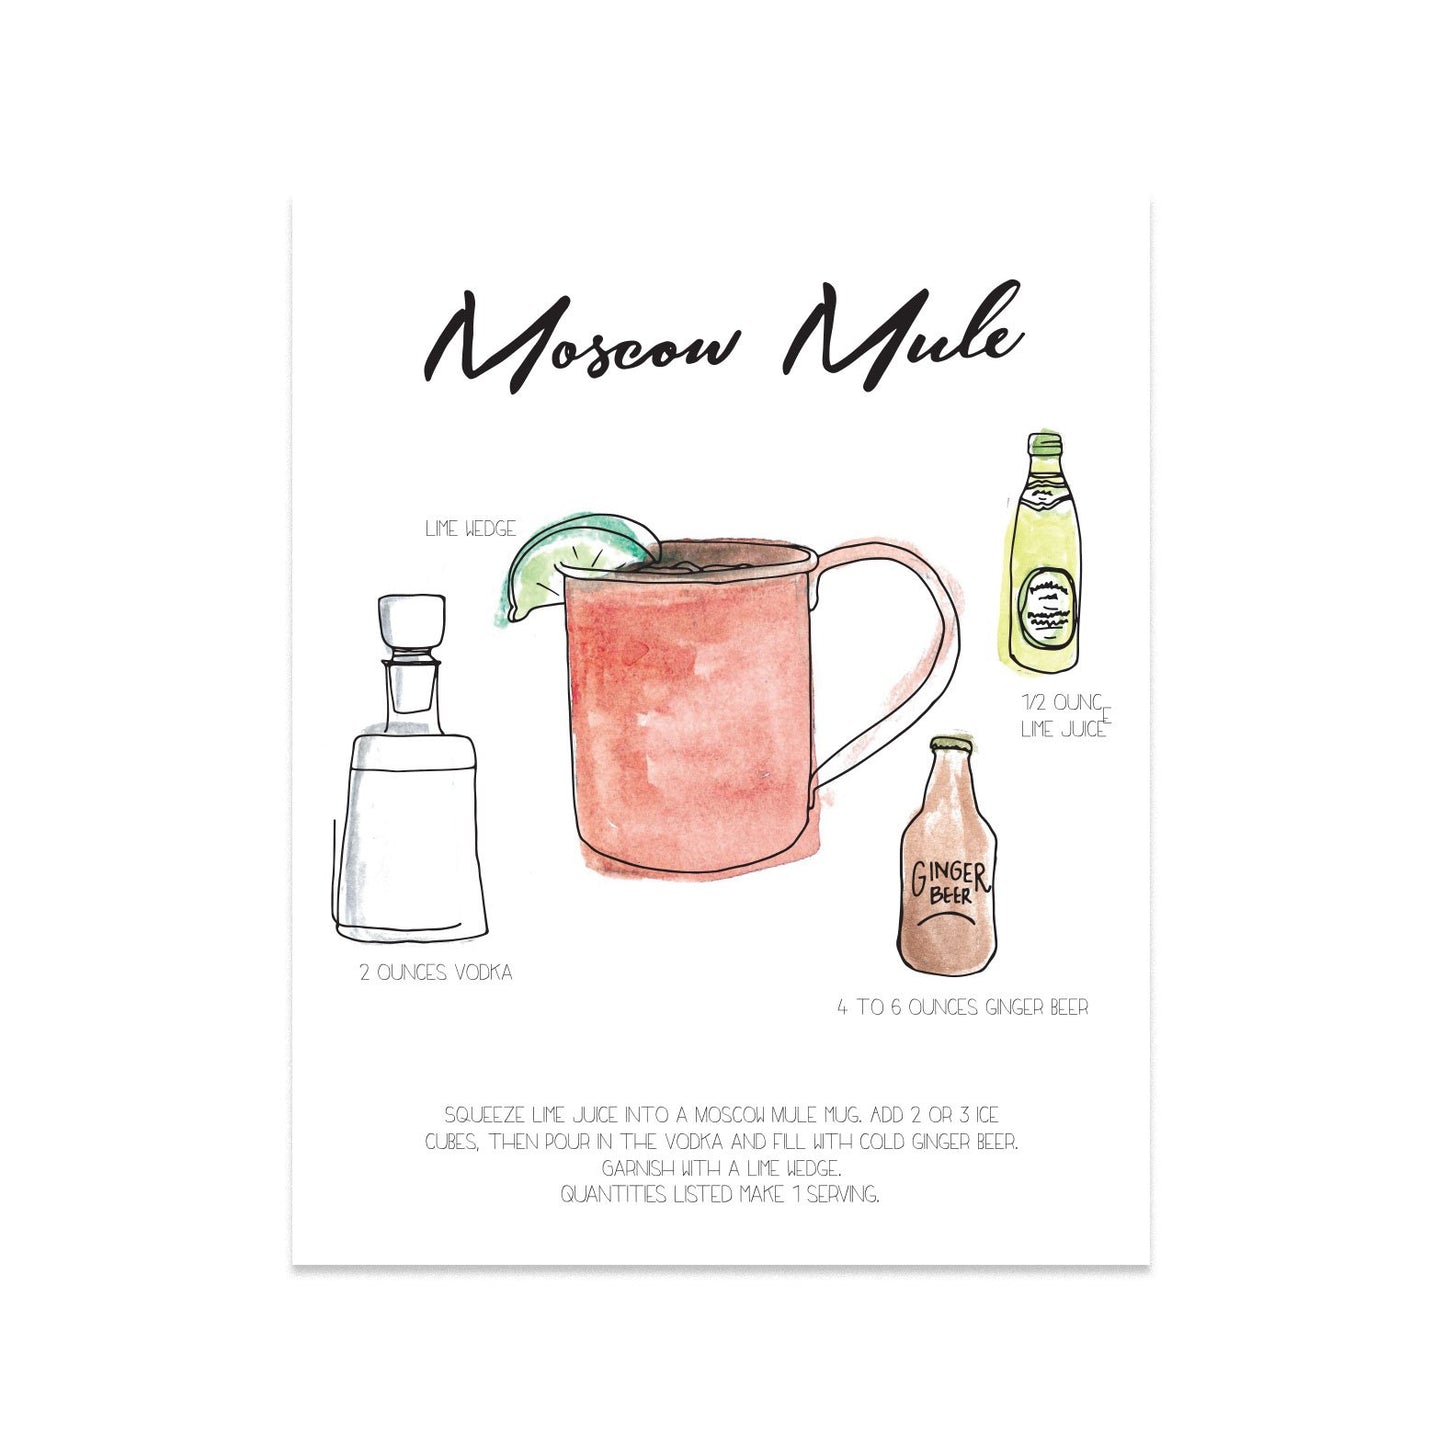 Moscow Mule Print - The Social Club